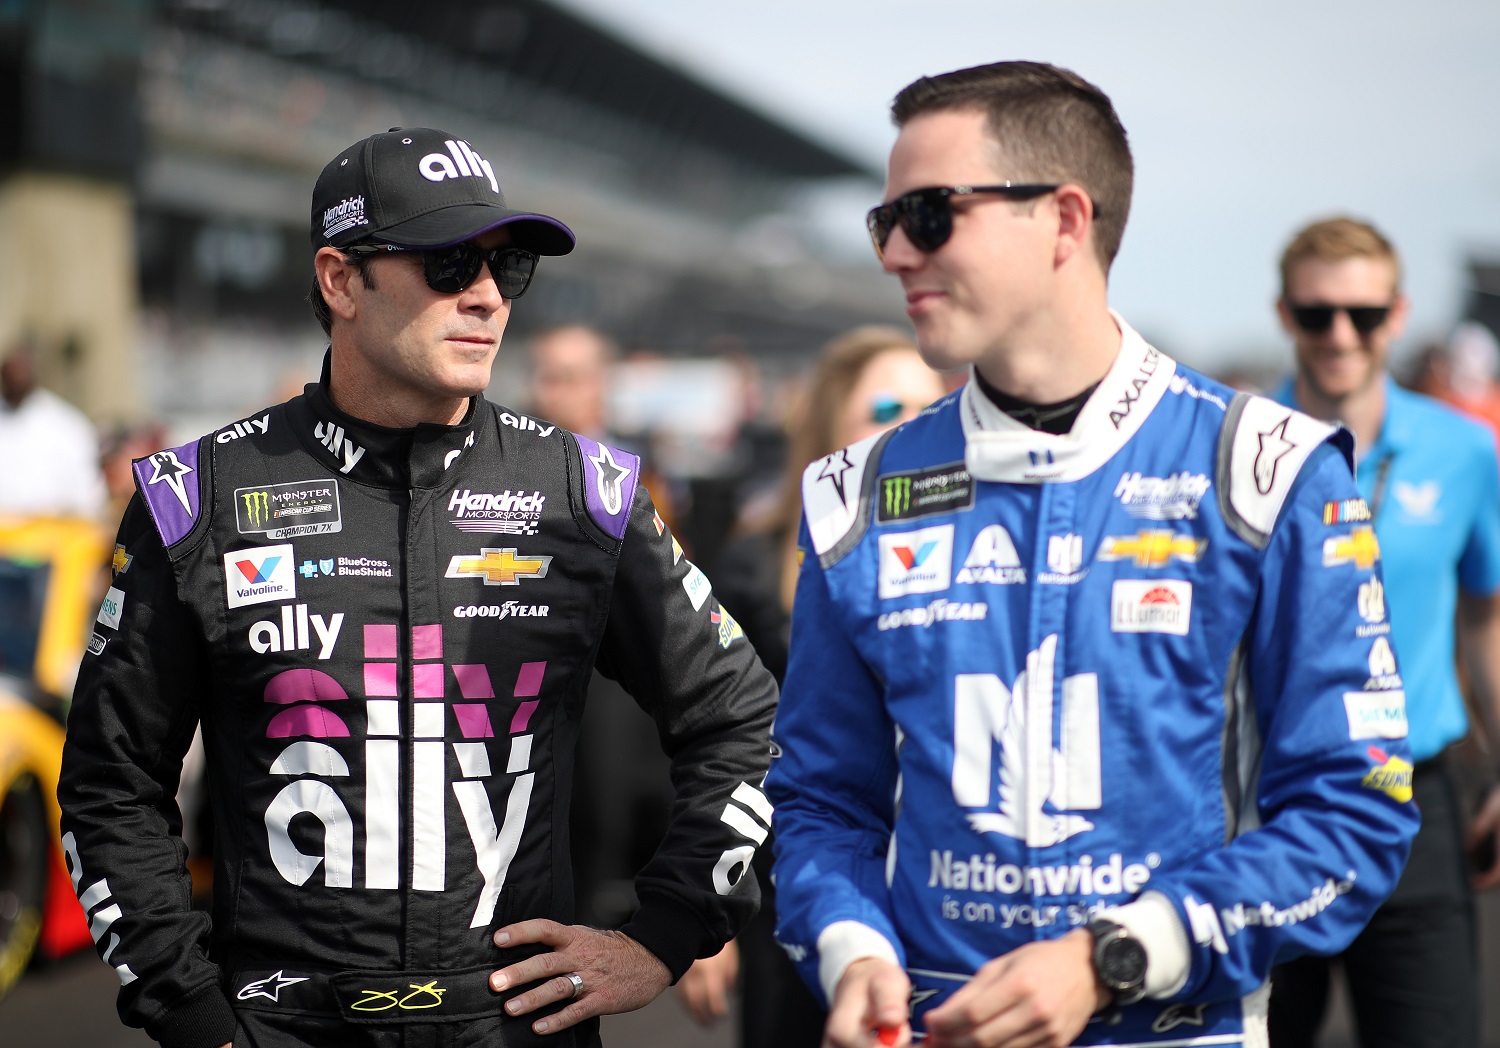 Alex Bowman, right, talks with Jimmie Johnson during qualifying for the NASCAR Cup Series Big Machine Vodka 400 at the Brickyard at Indianapolis Motor Speedway on Sept. 8, 2019 in Indianapolis, Indiana. | Chris Graythen/Getty Images